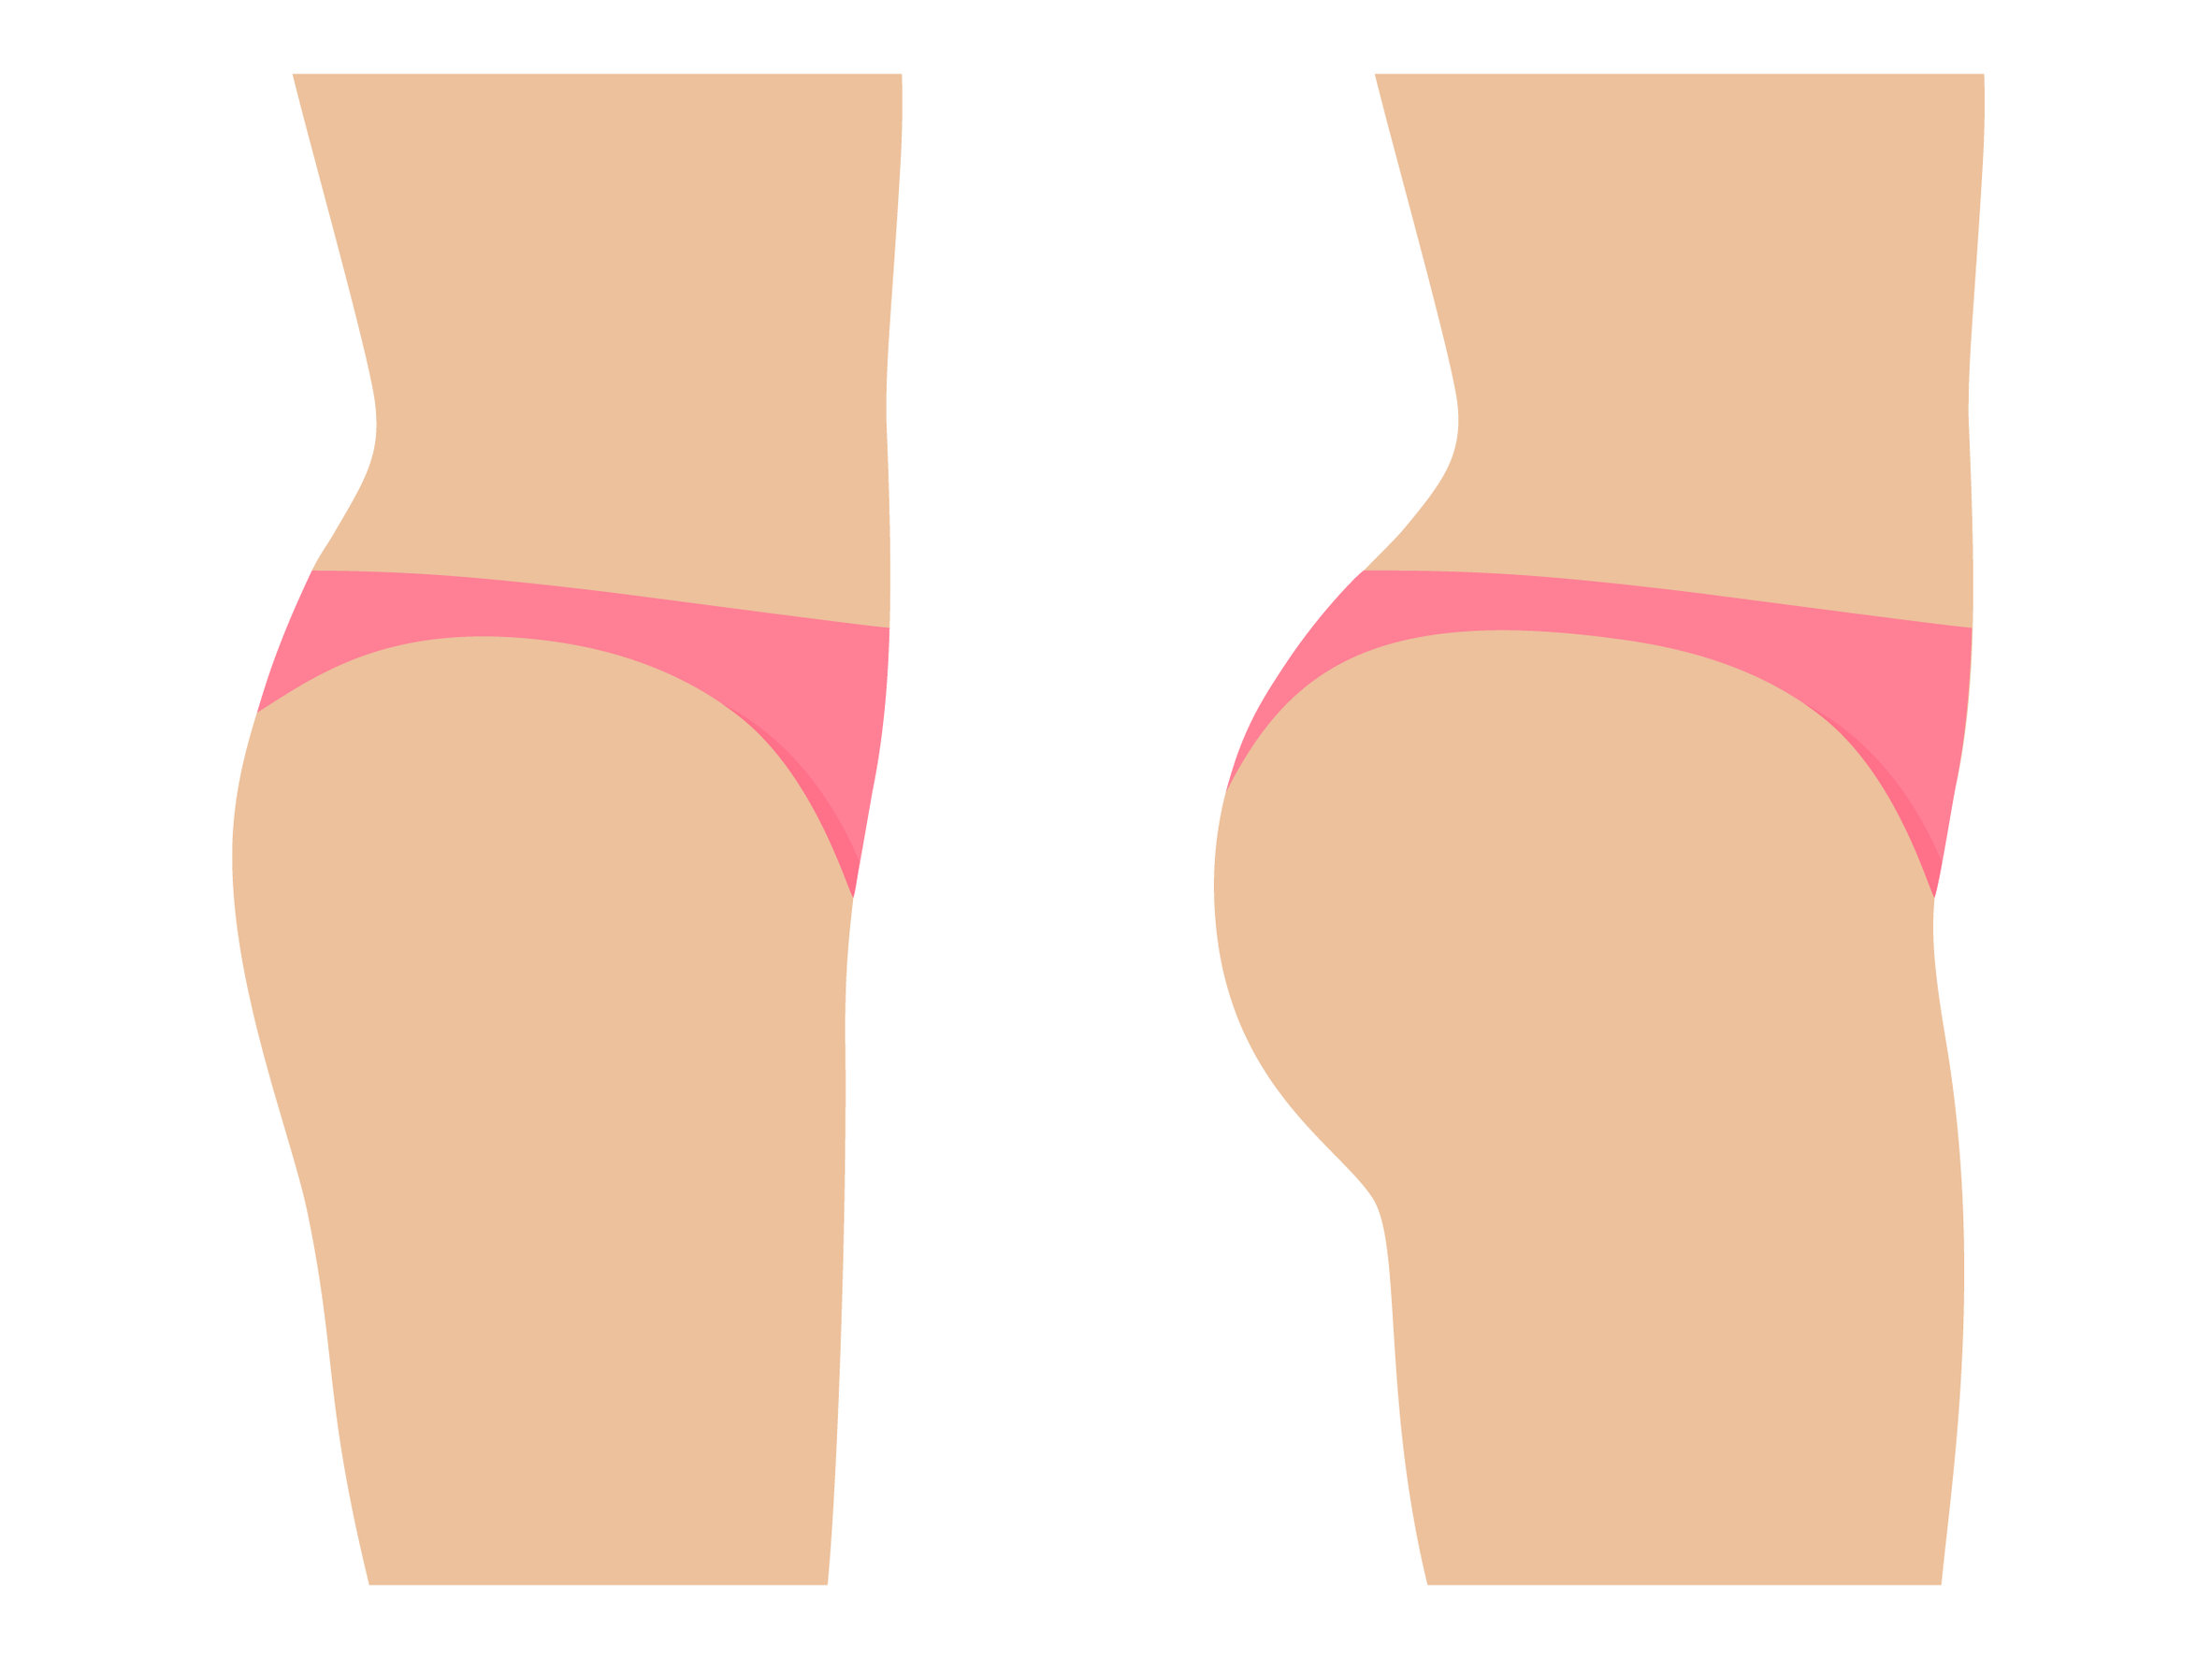 How Long Does It Take To Get Over A Brazilian Butt Lift?